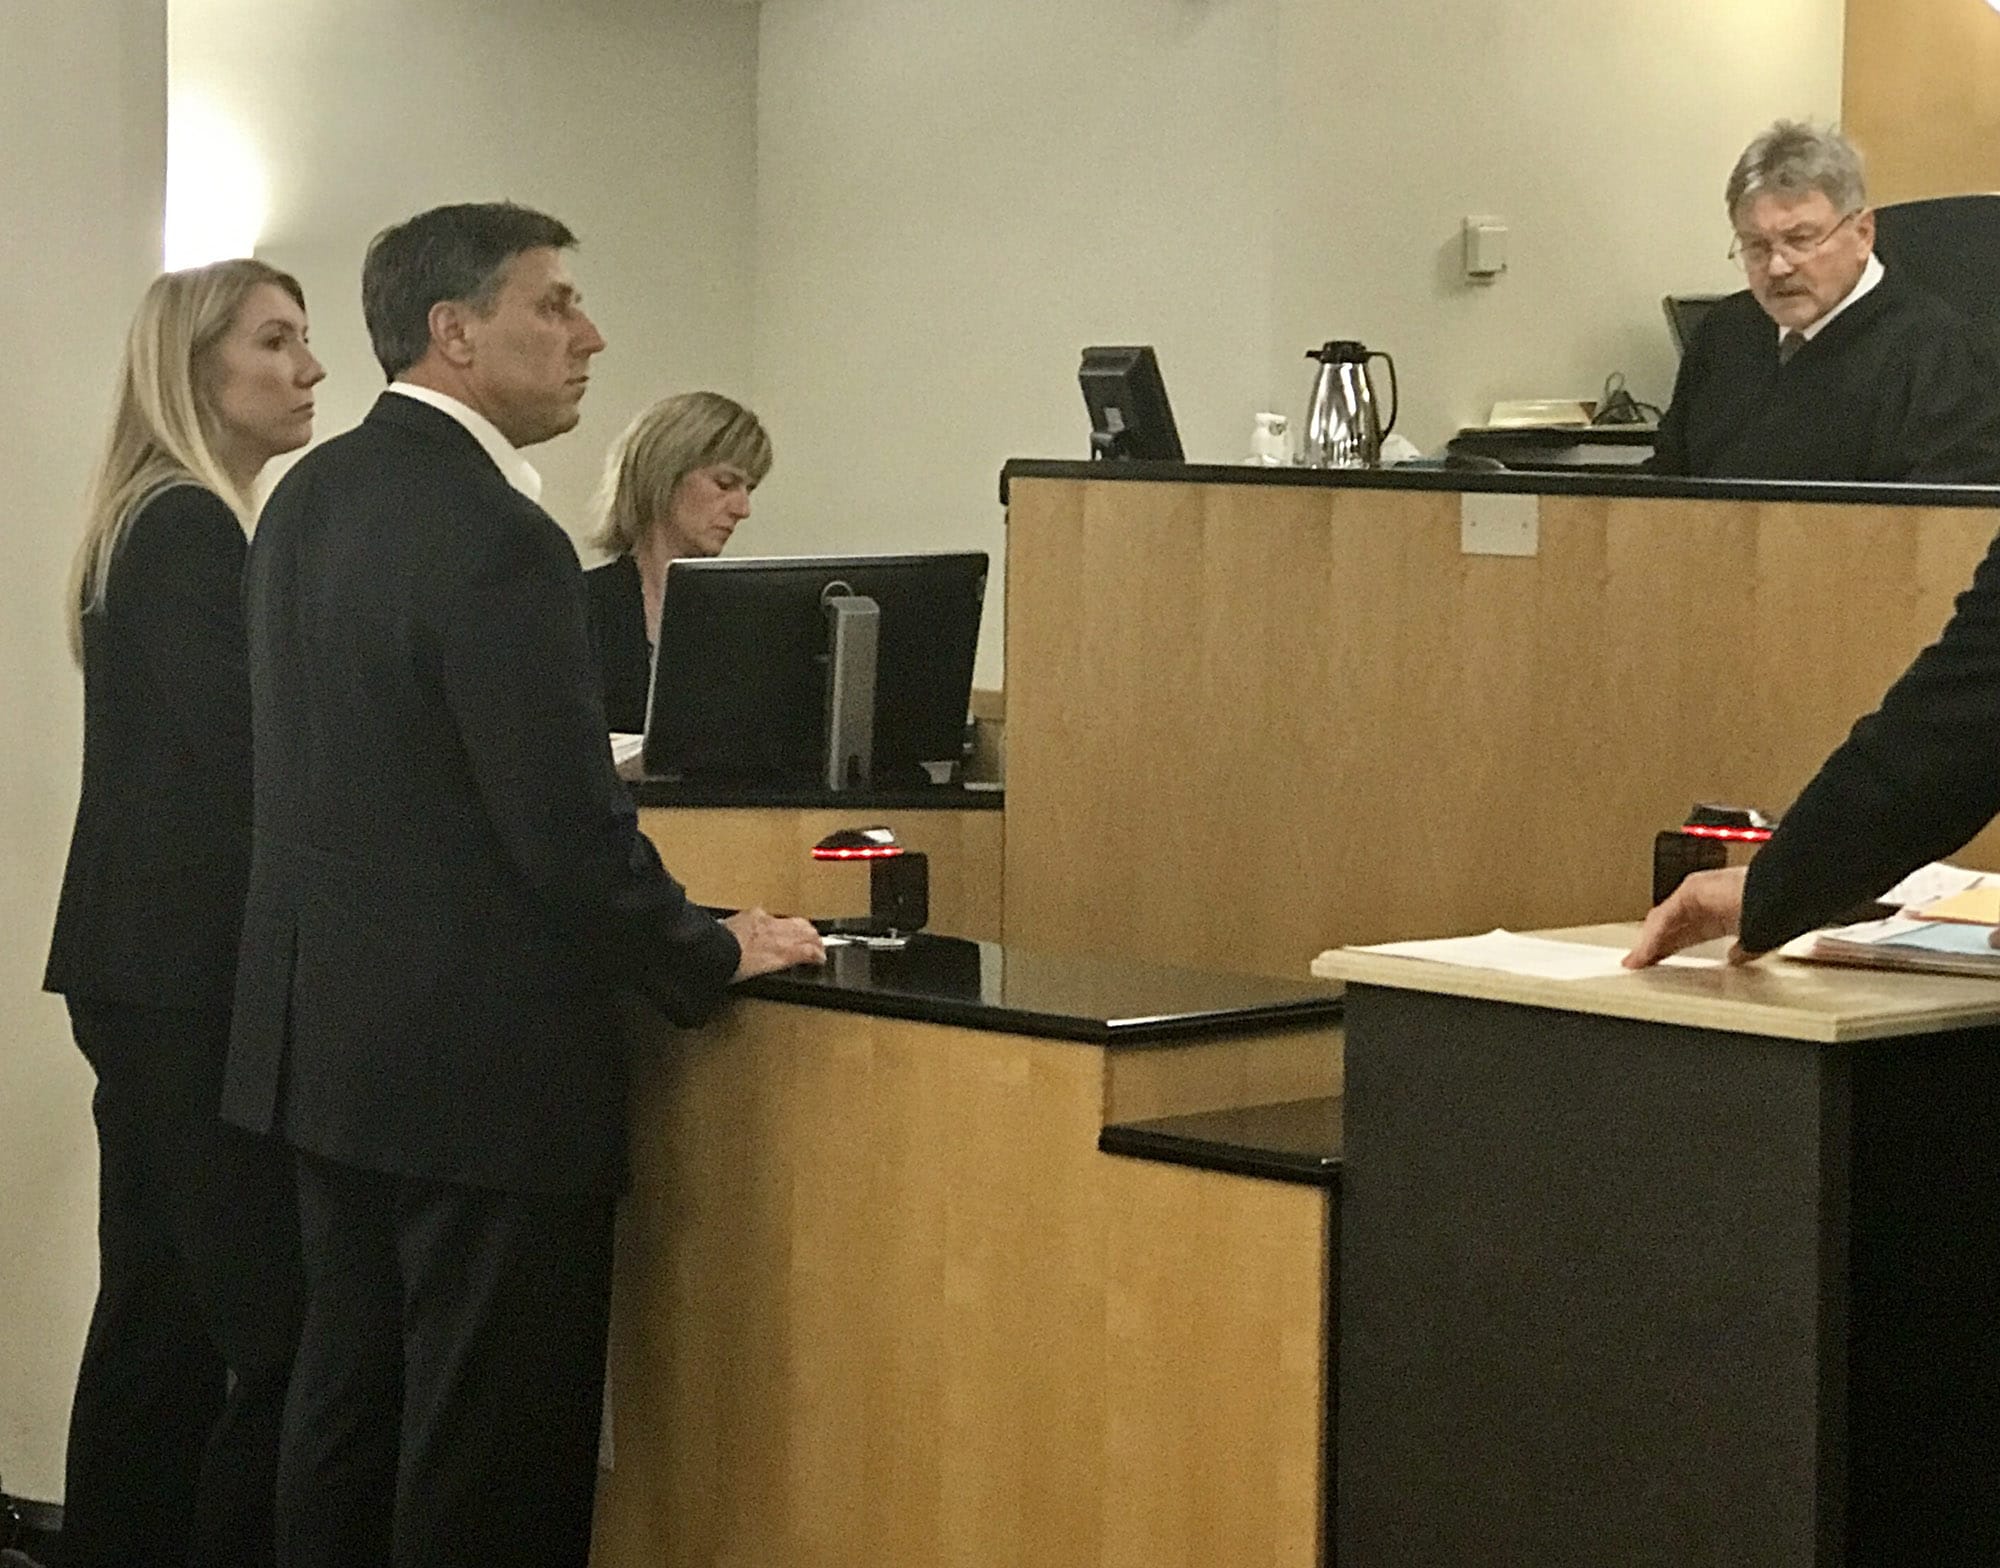 Jonathan Sall, an investigator with the U.S. Coast Guard, appears at an earlier court date in Clark County Superior Court.